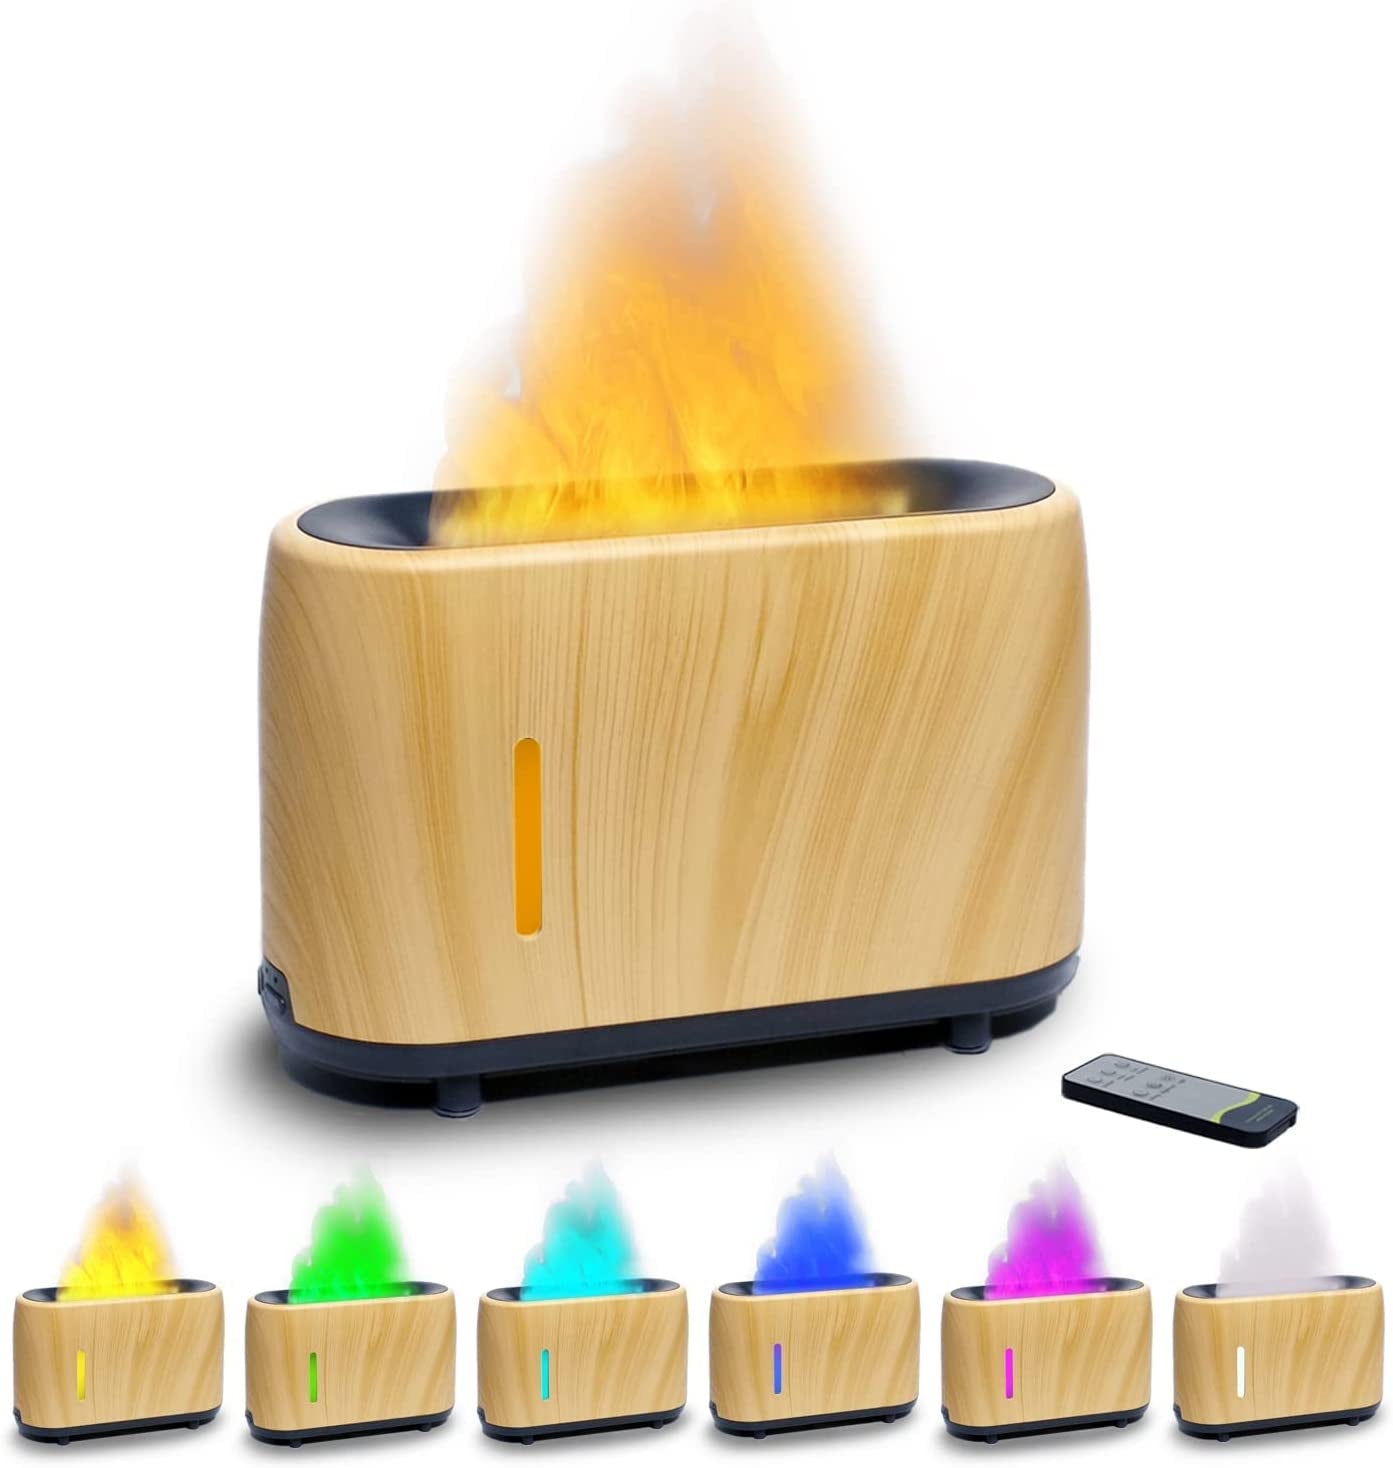 Flame Diffuser Humidifier 7 Flame Colors,Essential Oil Aroma Therapy Diffuser with Waterless Auto-Off Protection,Fire Air Diffuser for Home,Office,Bedroom Wood Grain